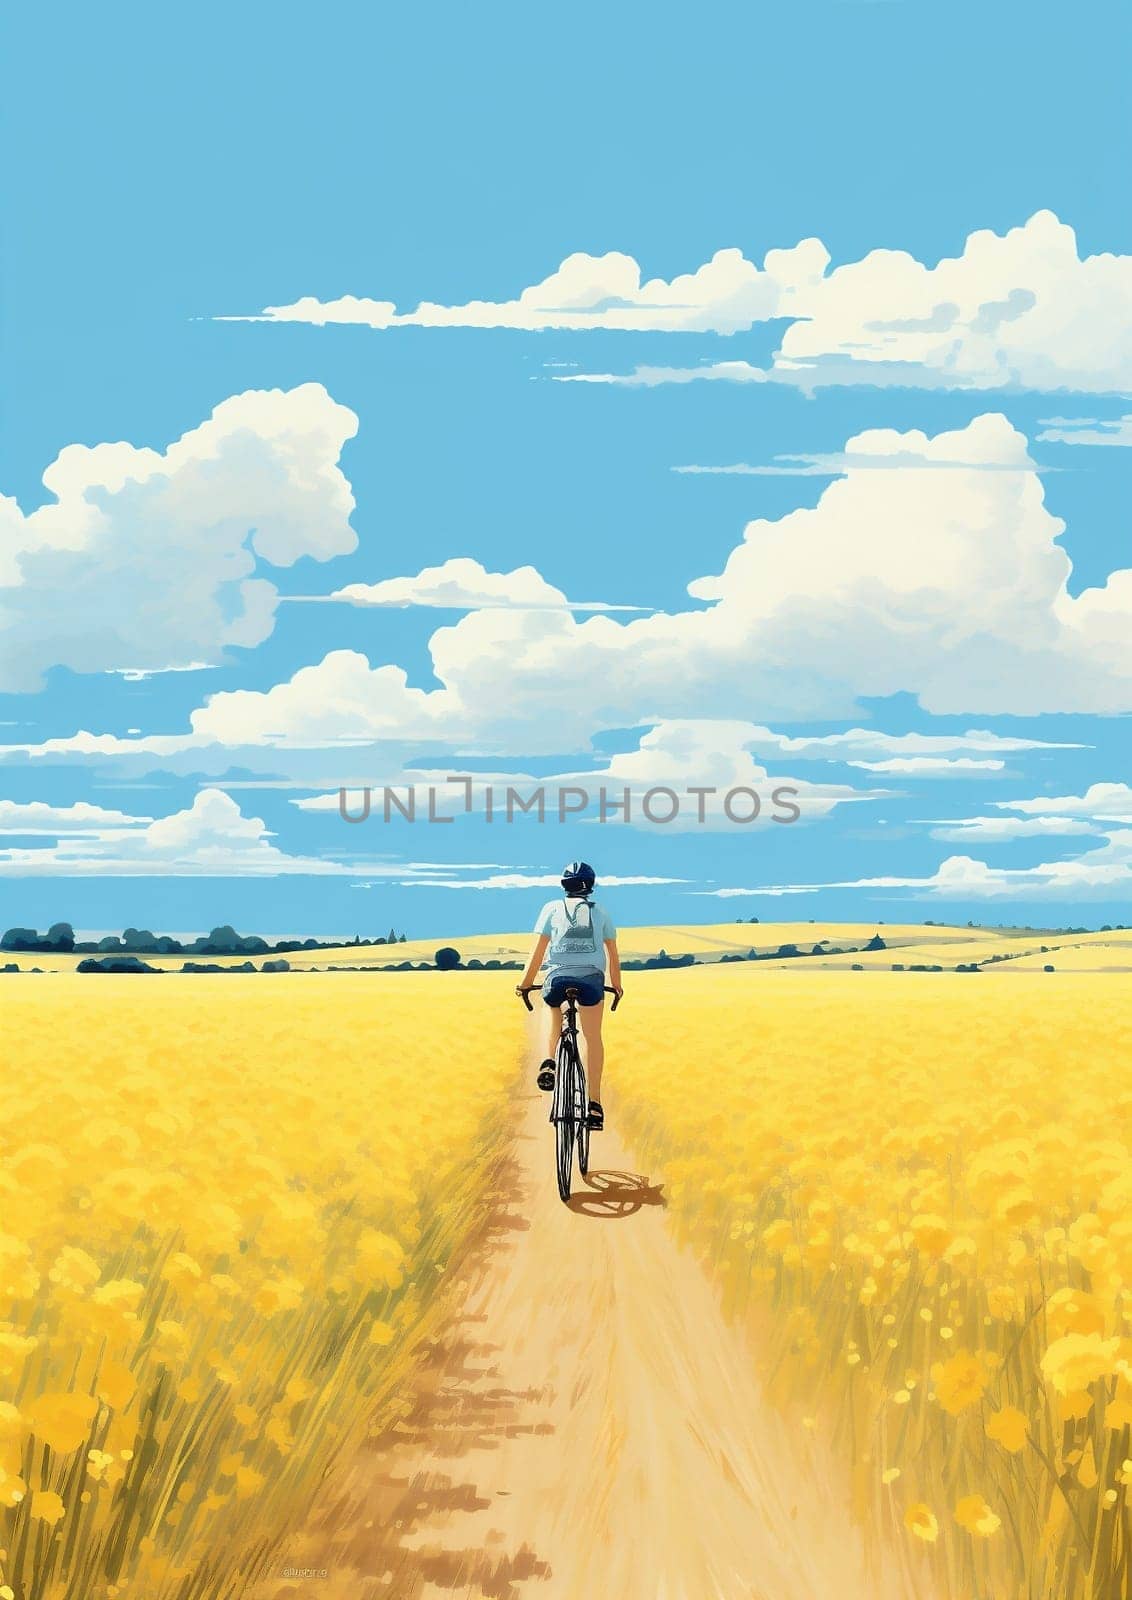 Crop man path environment nature sky country land landscape yellow blue meadow rural road spring field plant green agricultural countryside summer